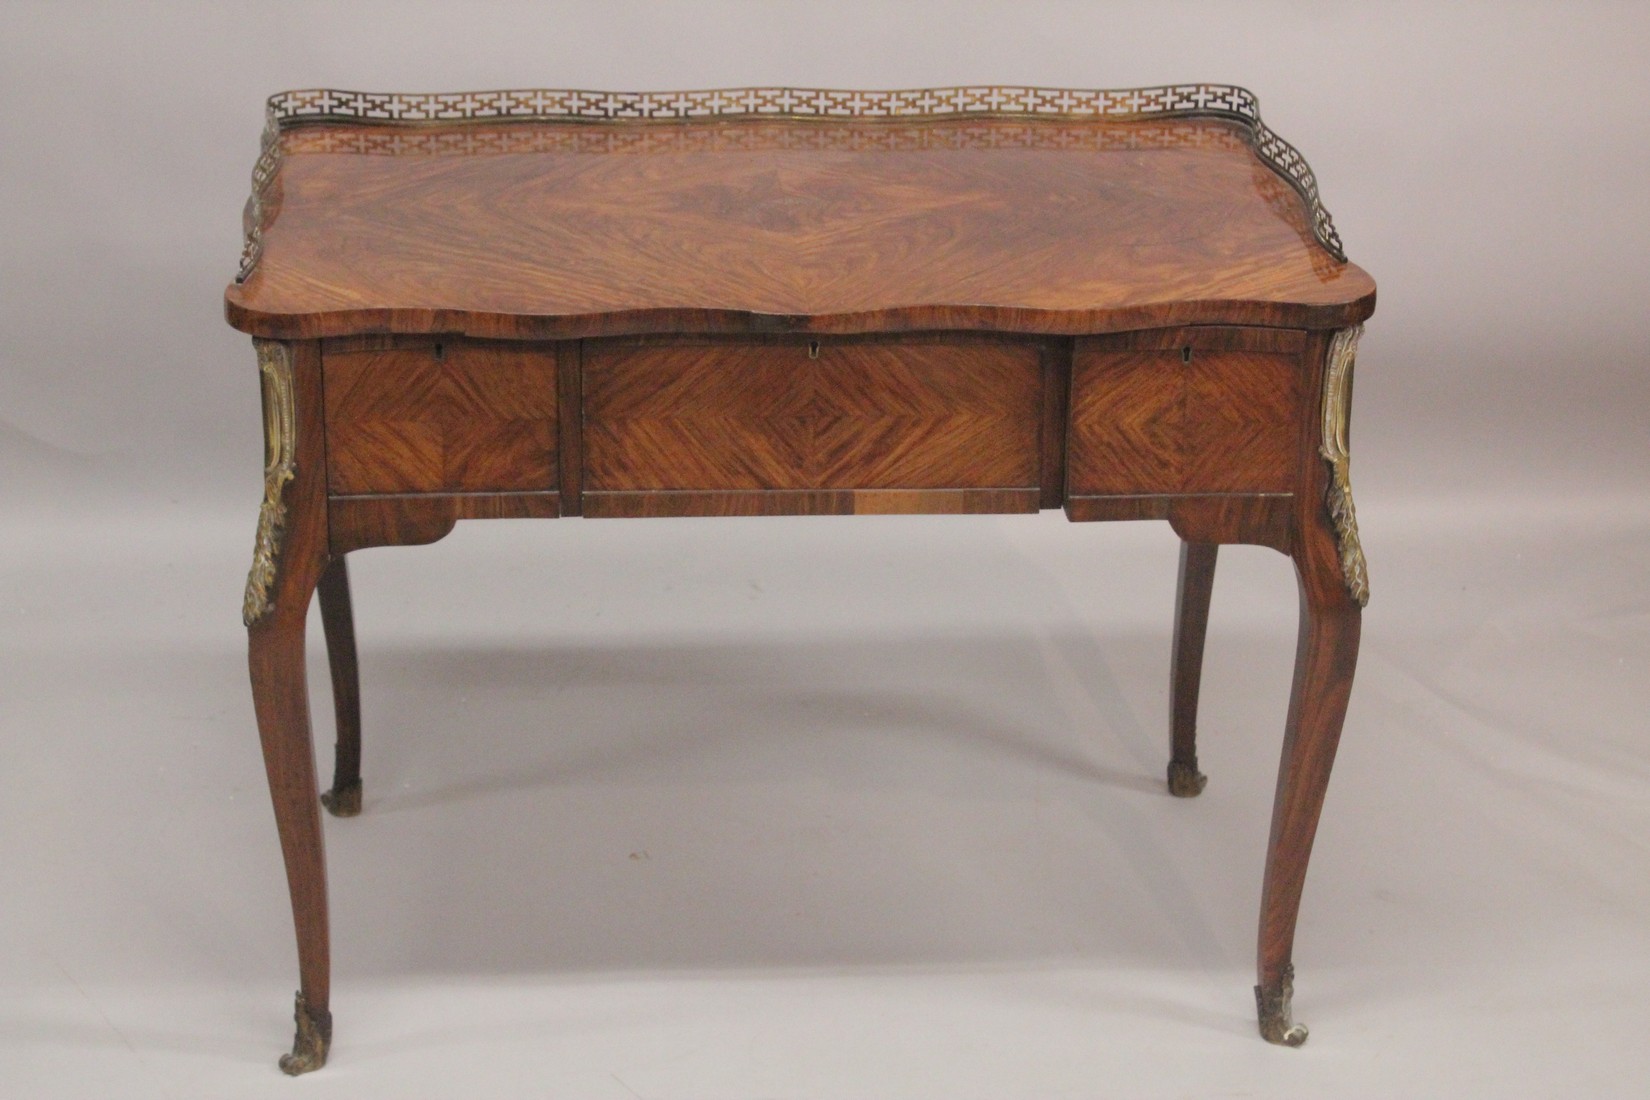 AGOOD 19TH CENTURY FRENCH KINGWOOD PADROUSE with brass galley and quartered top, three freize